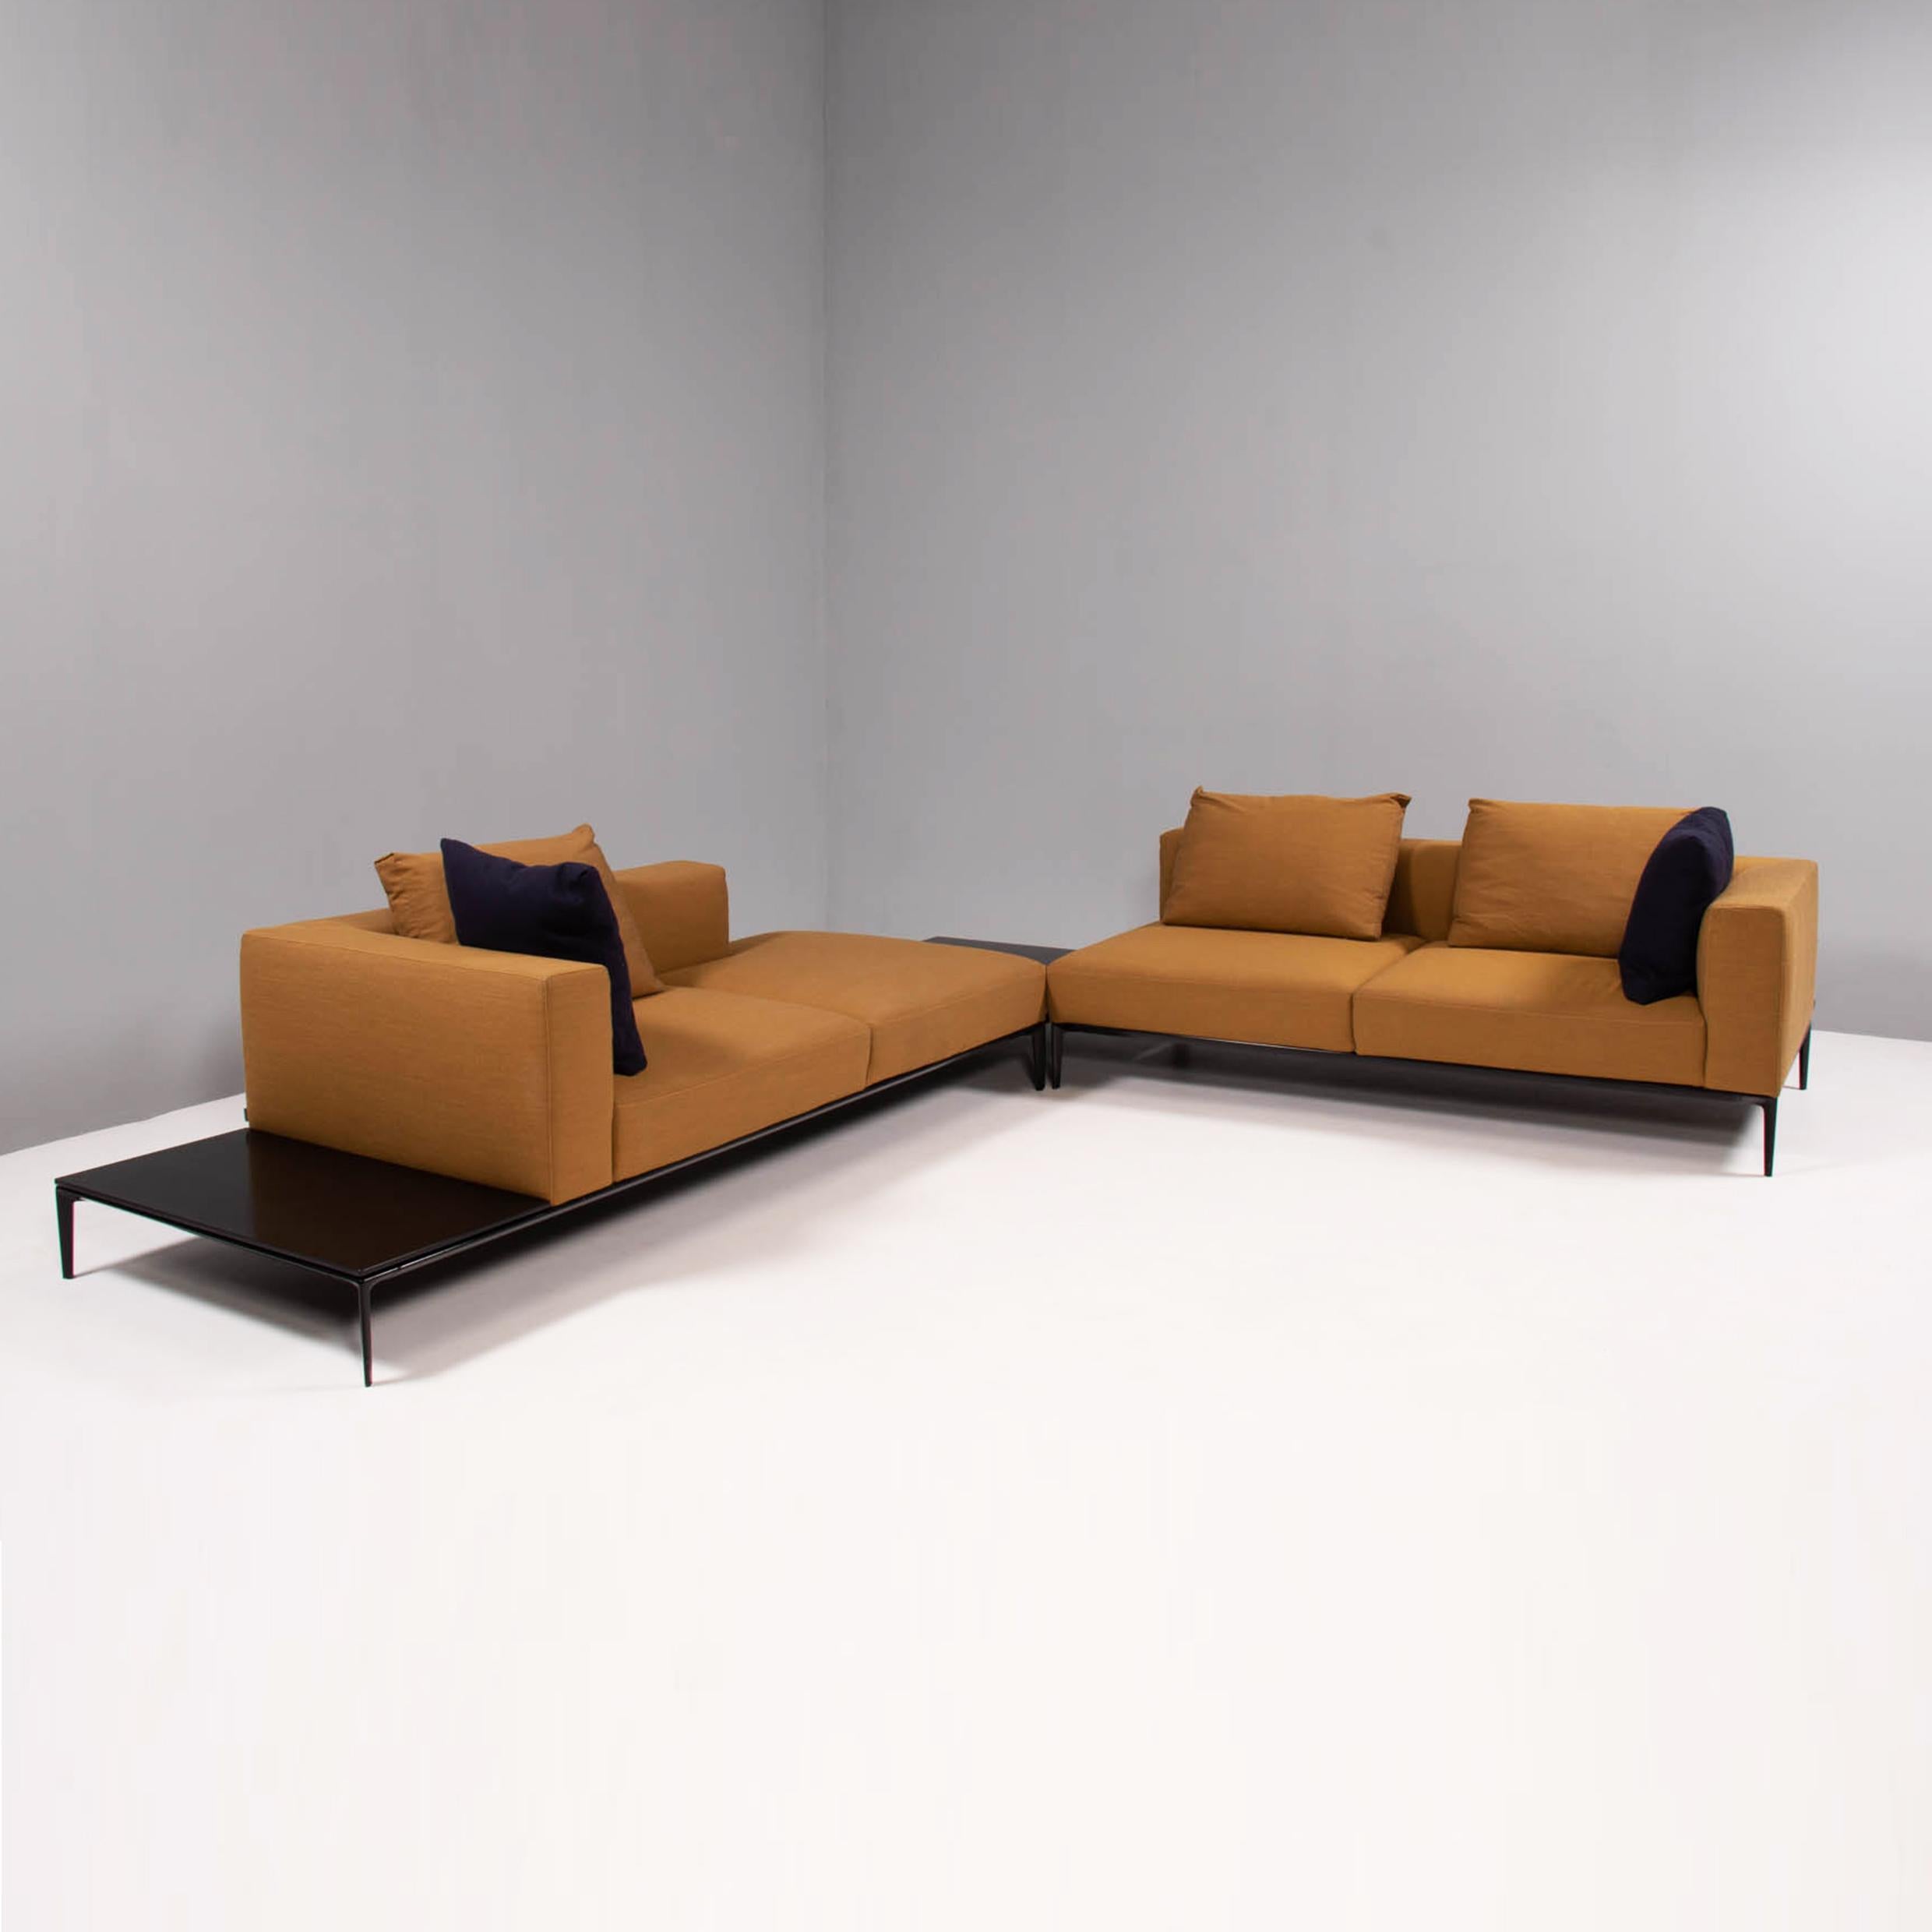 Designed by EOOS for Walter Knoll, the Jaan Living sofa won a Red Dot Award in 2011 and is a fantastic example of sophisticated modern design.

Comprising of two separate elements, the sofa can be configured to create one large corner unit or two